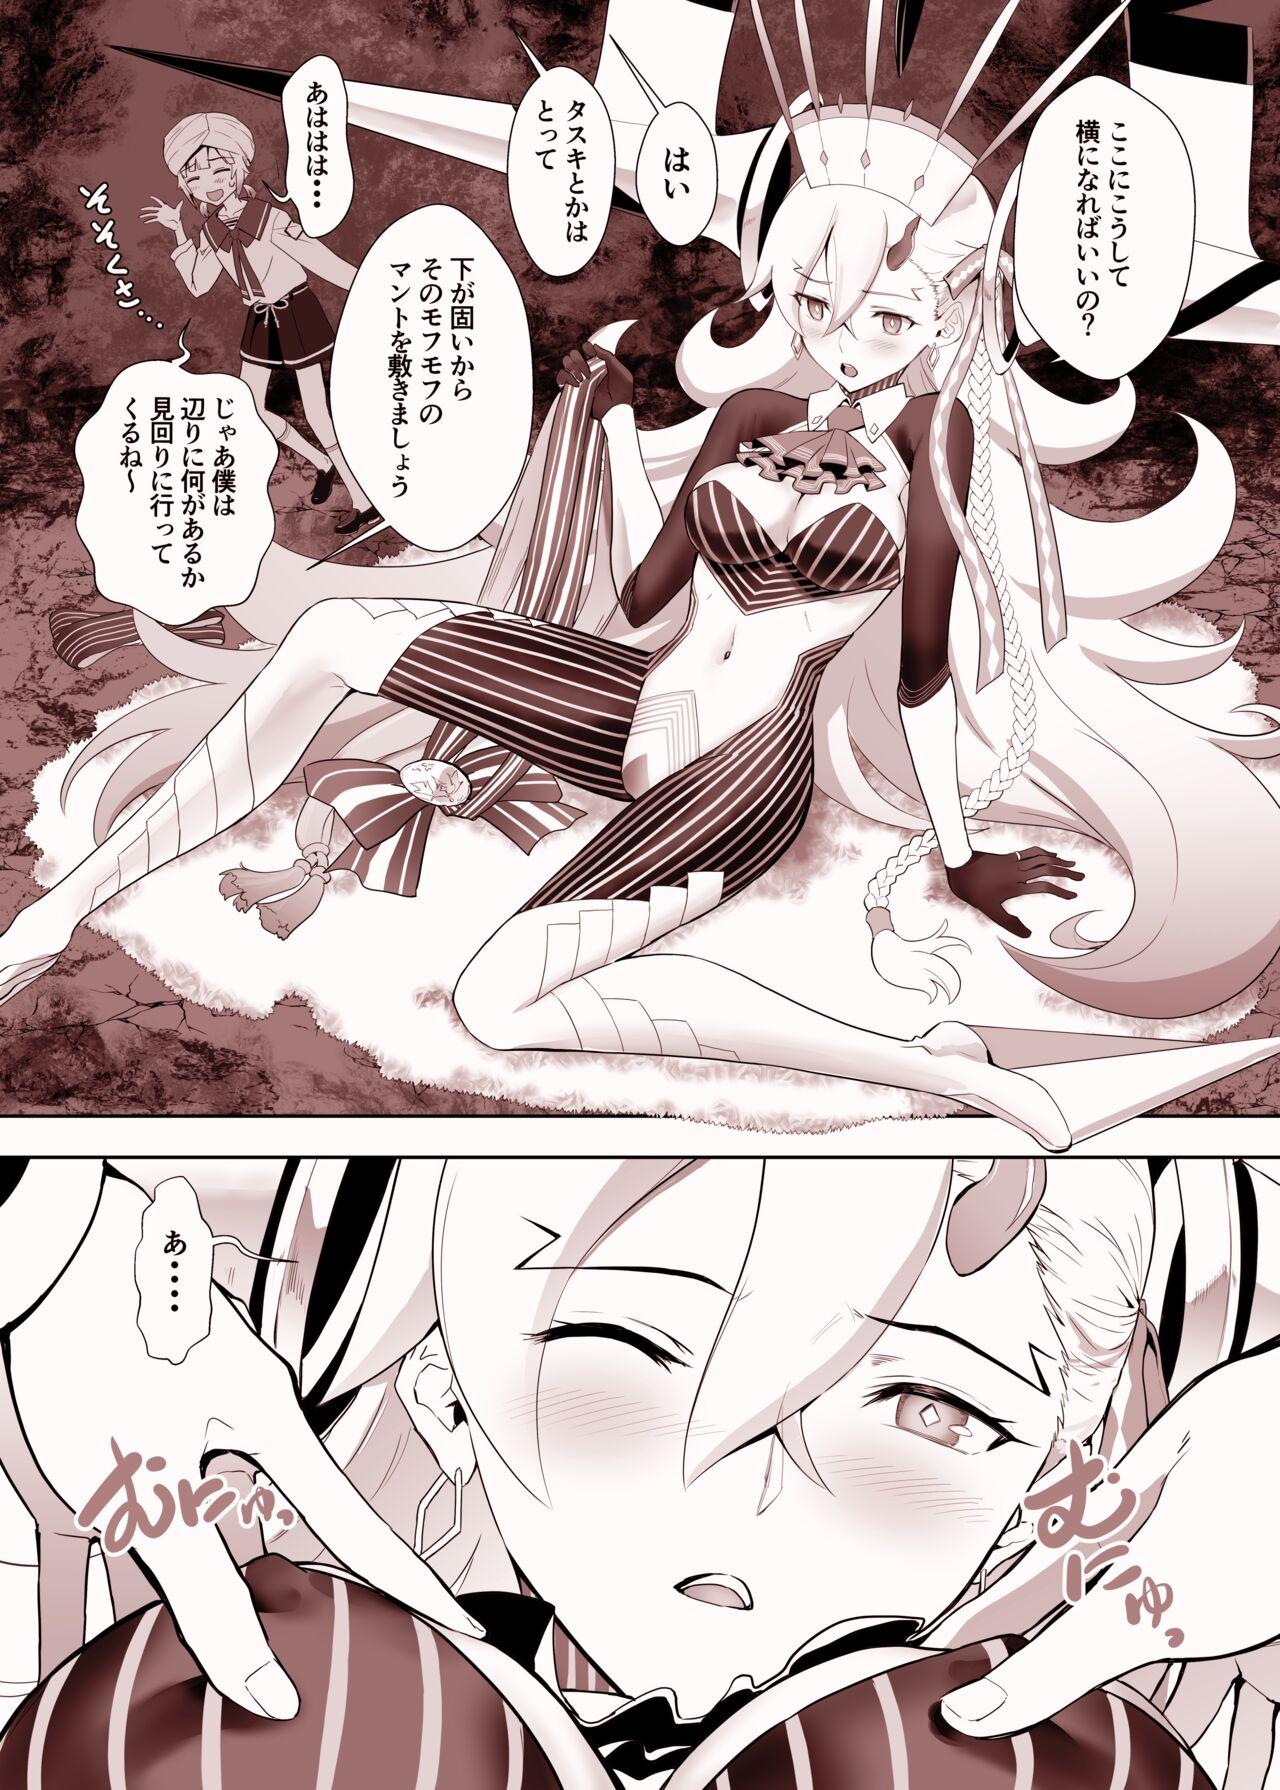 Bound Lovely U - Fate grand order Fleshlight - Page 8